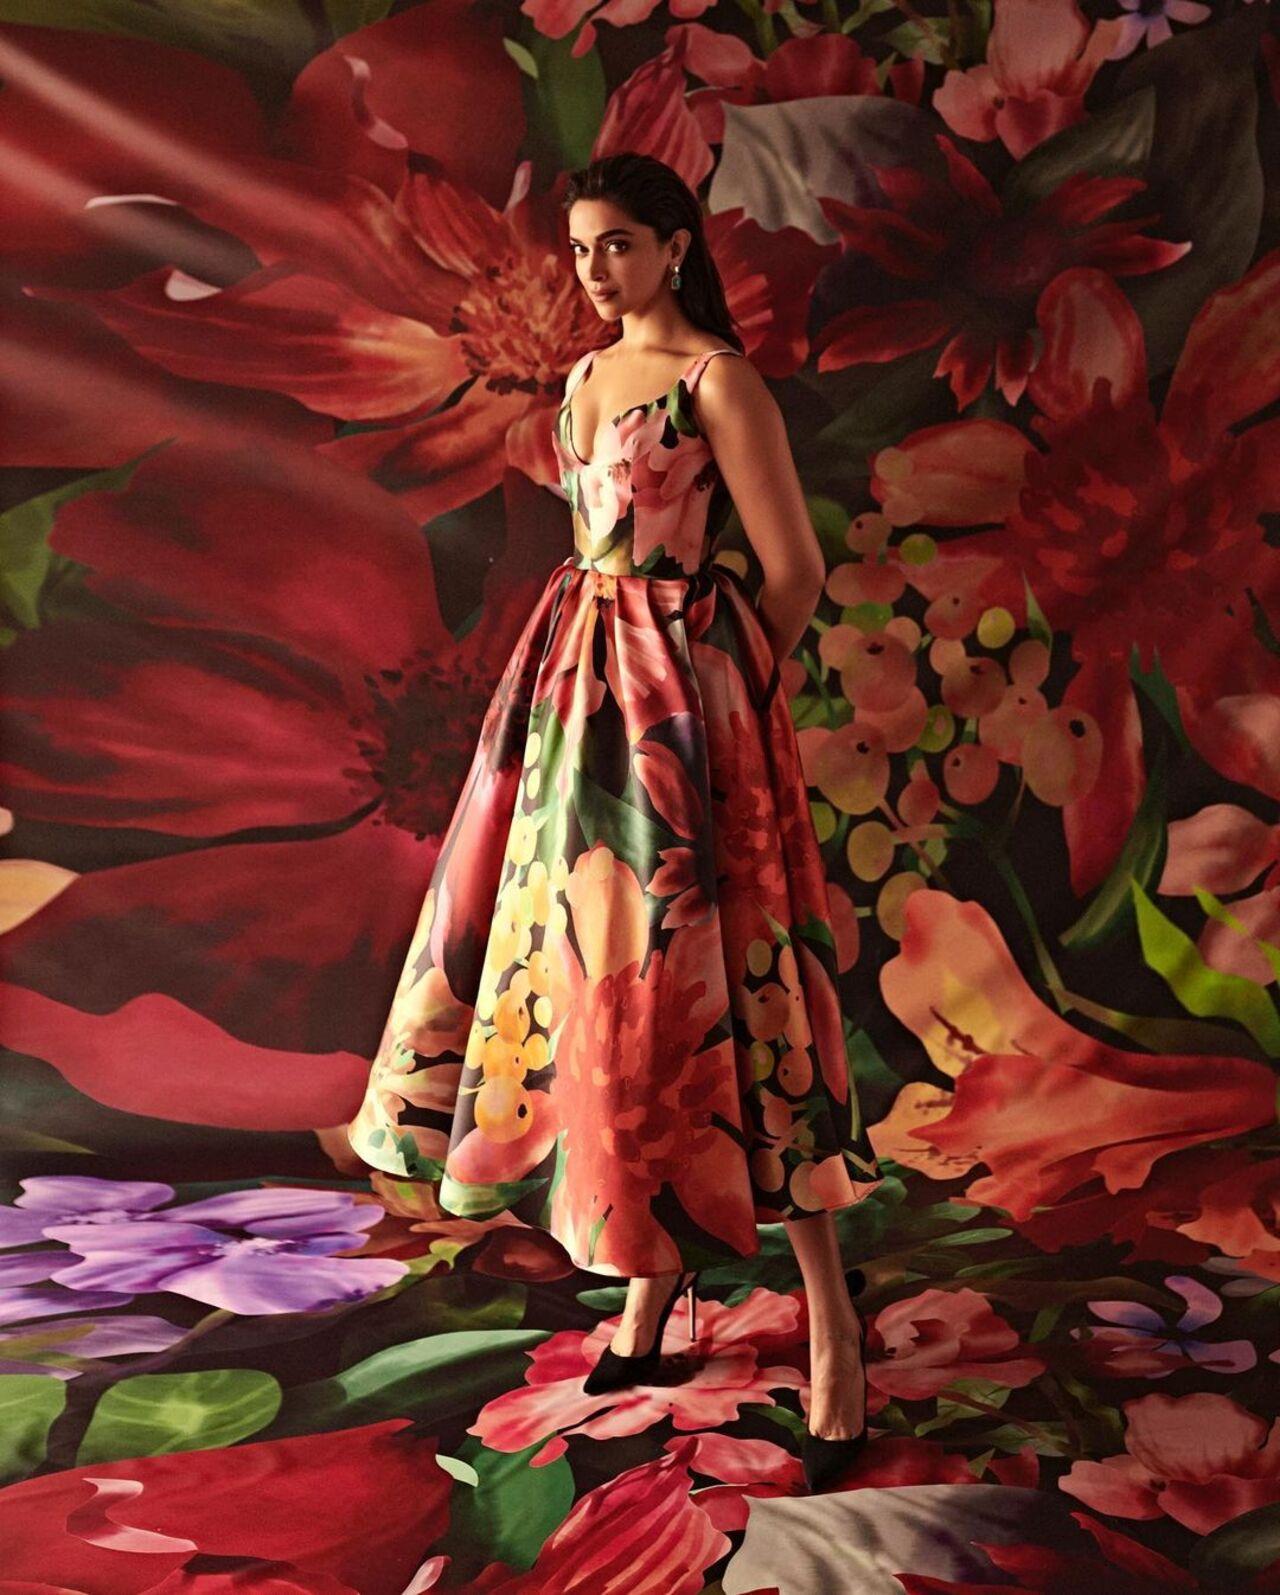 Deepika Padukone was grace personified in a multicoloured floral and fruity gown. She set the benchmark high with this look (Source/ Deepika Padukone Instagram)